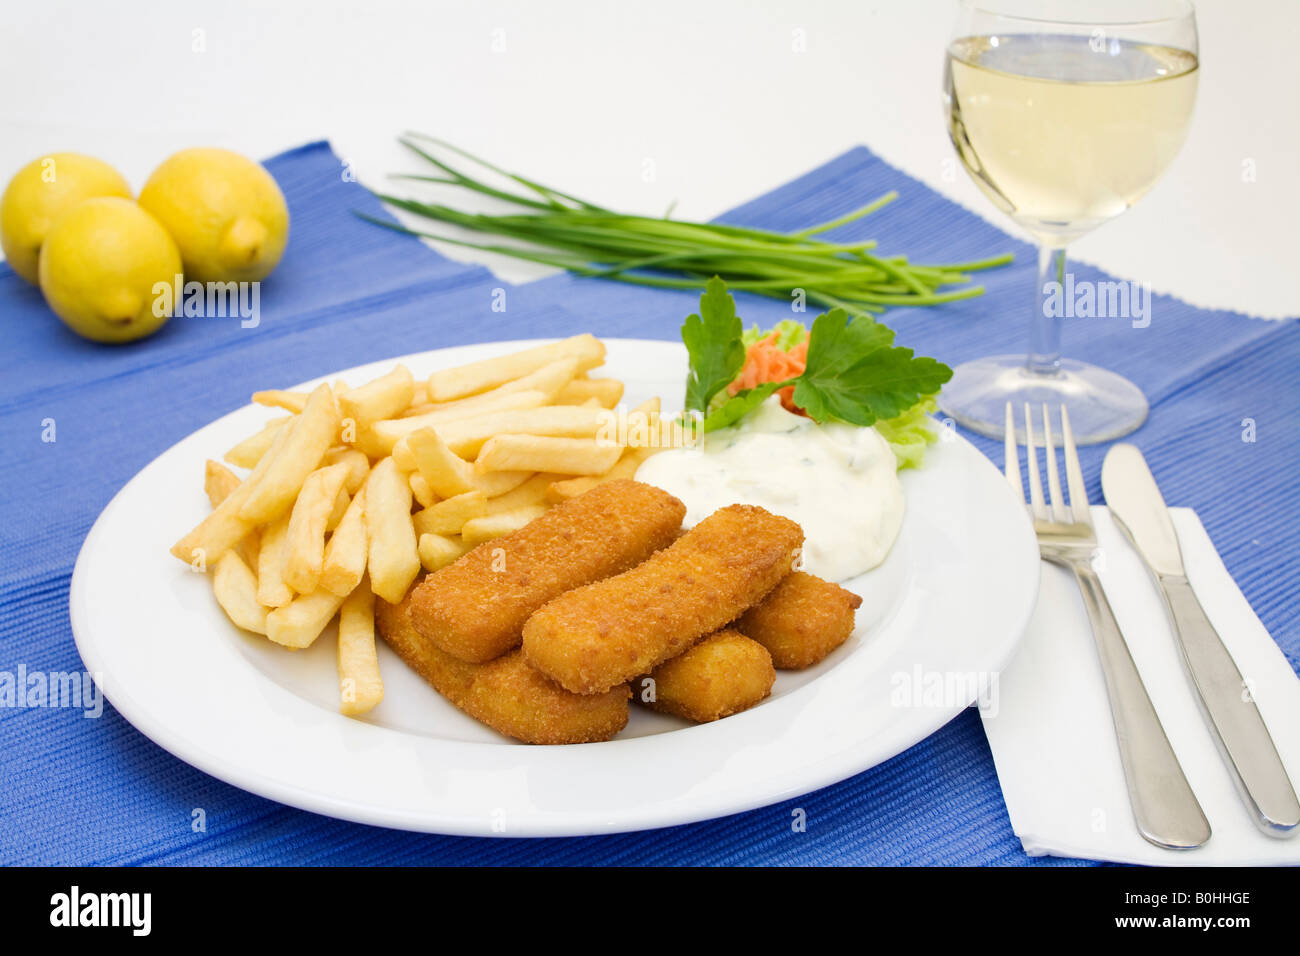 Fish sticks, tartar sauce and french fries served with a glass of white wine, lemons and chives Stock Photo